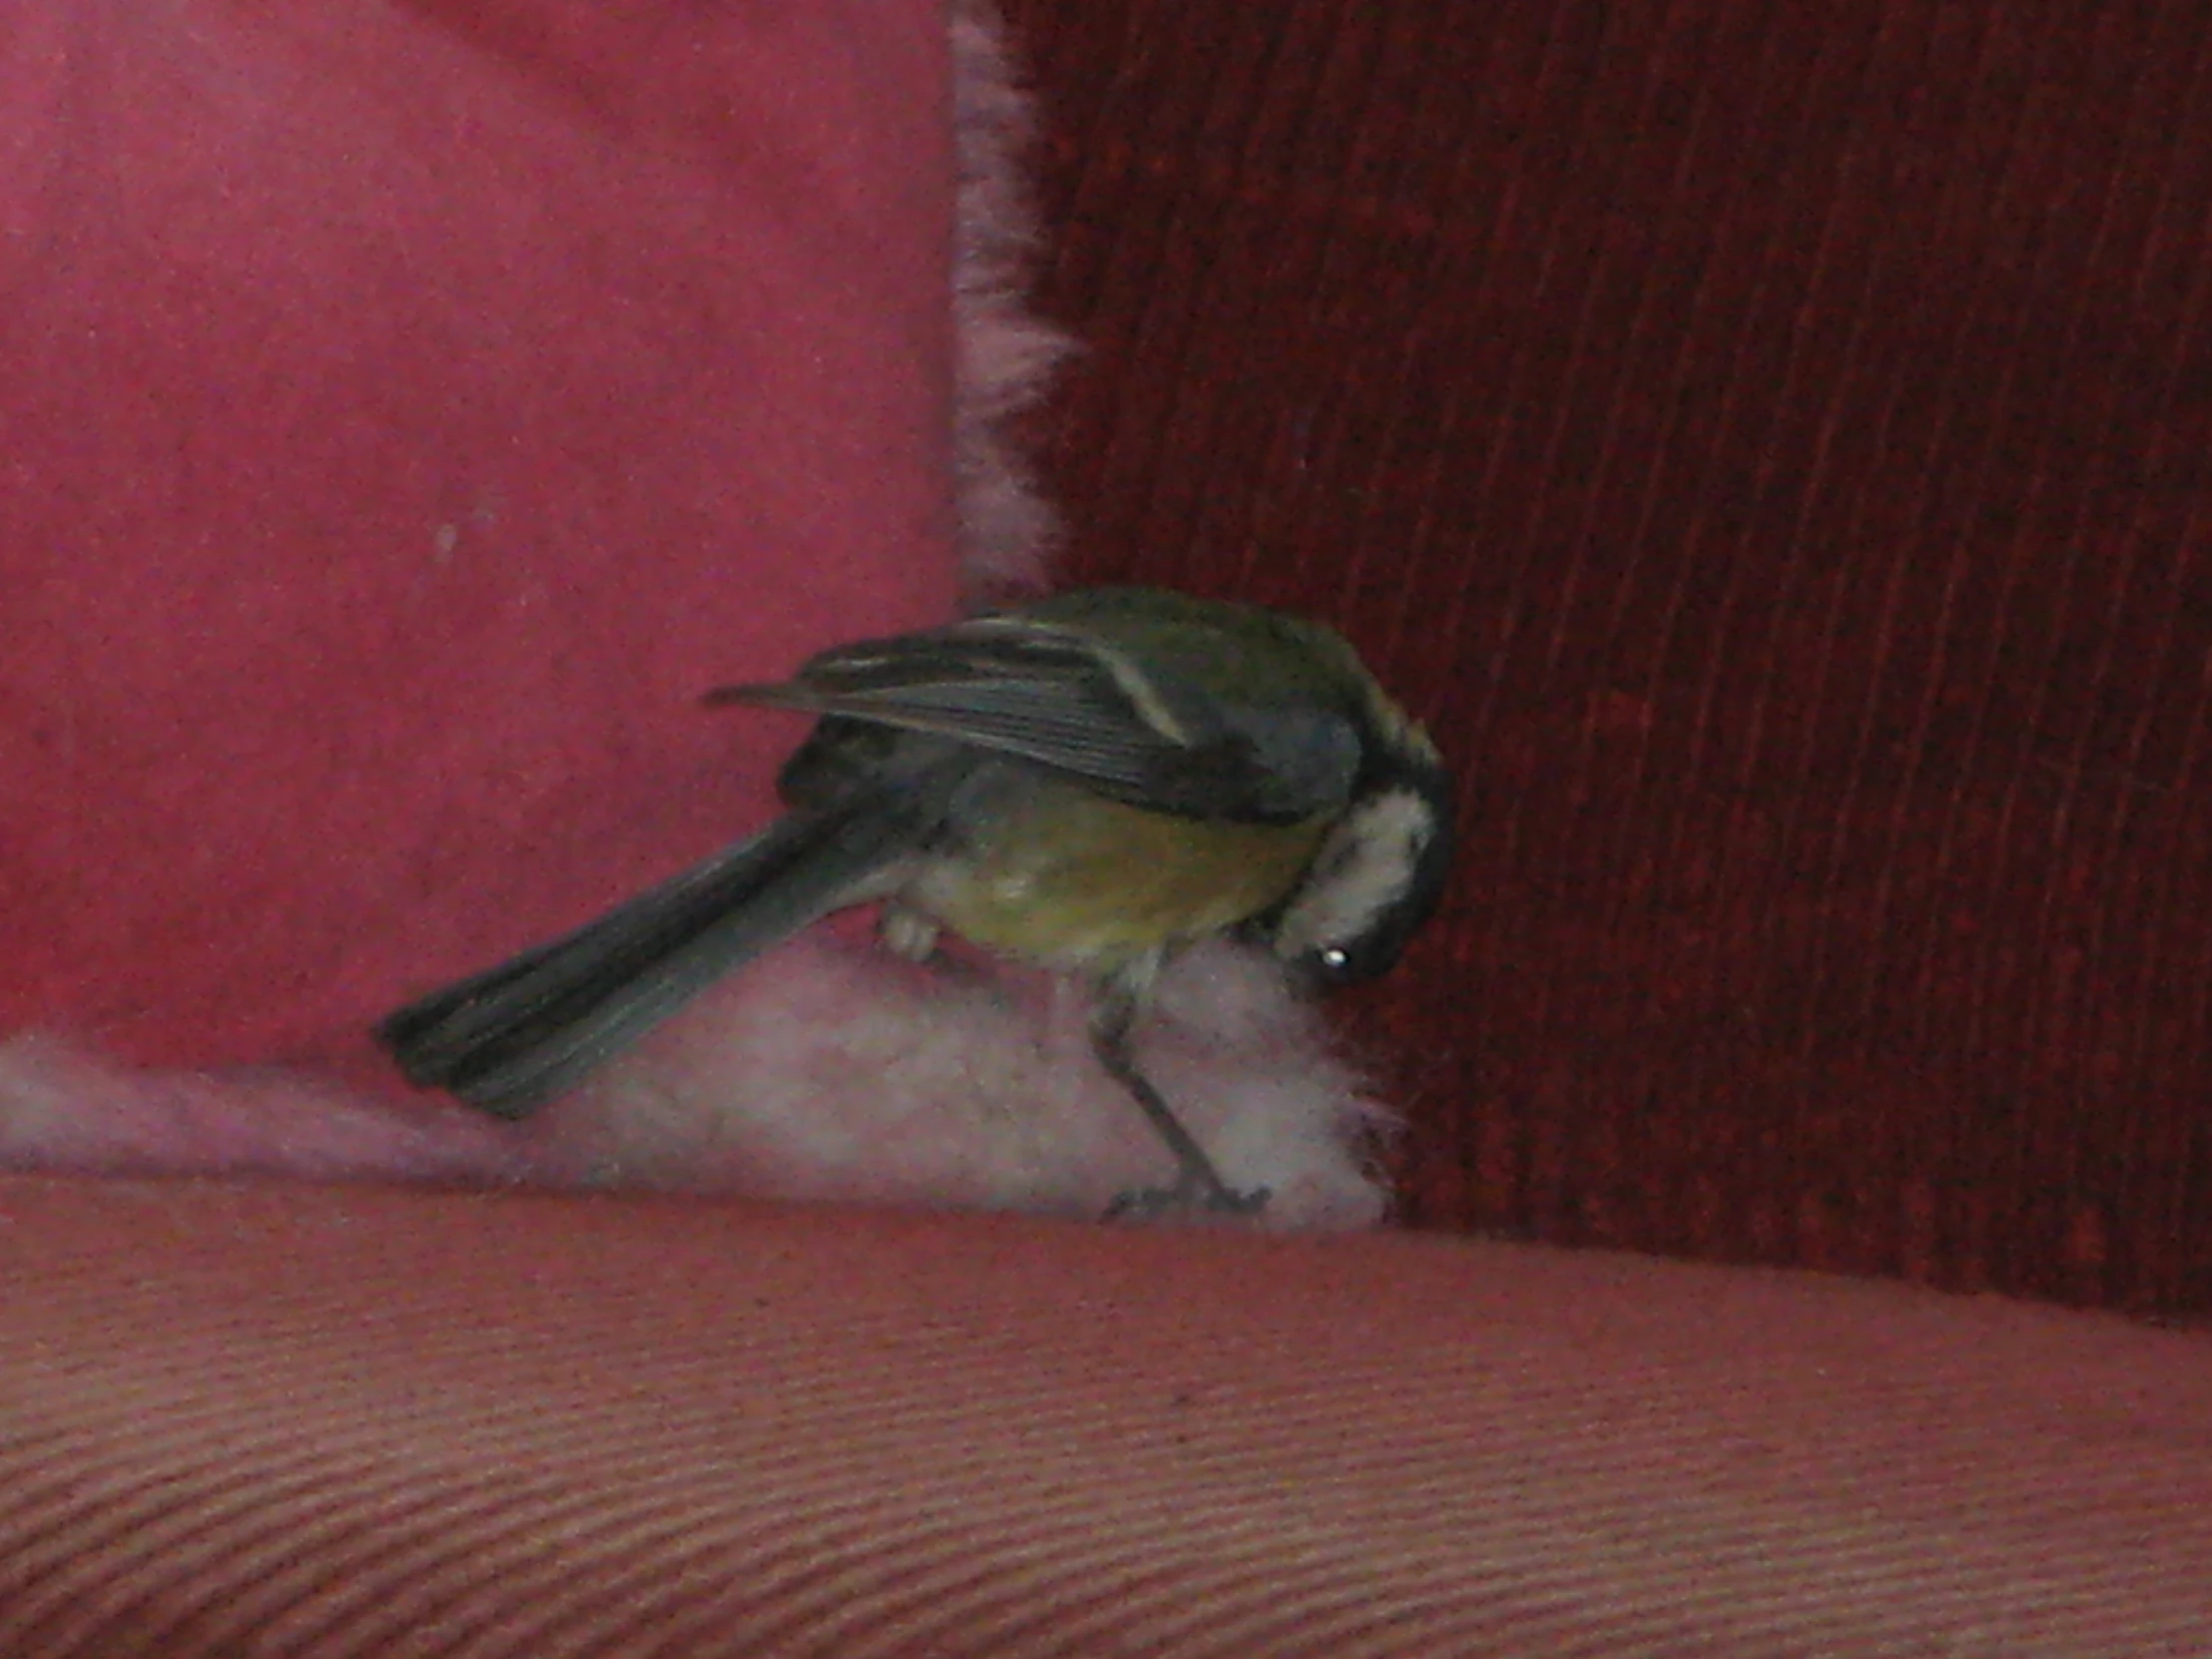 a small bird standing on top of a red cushion